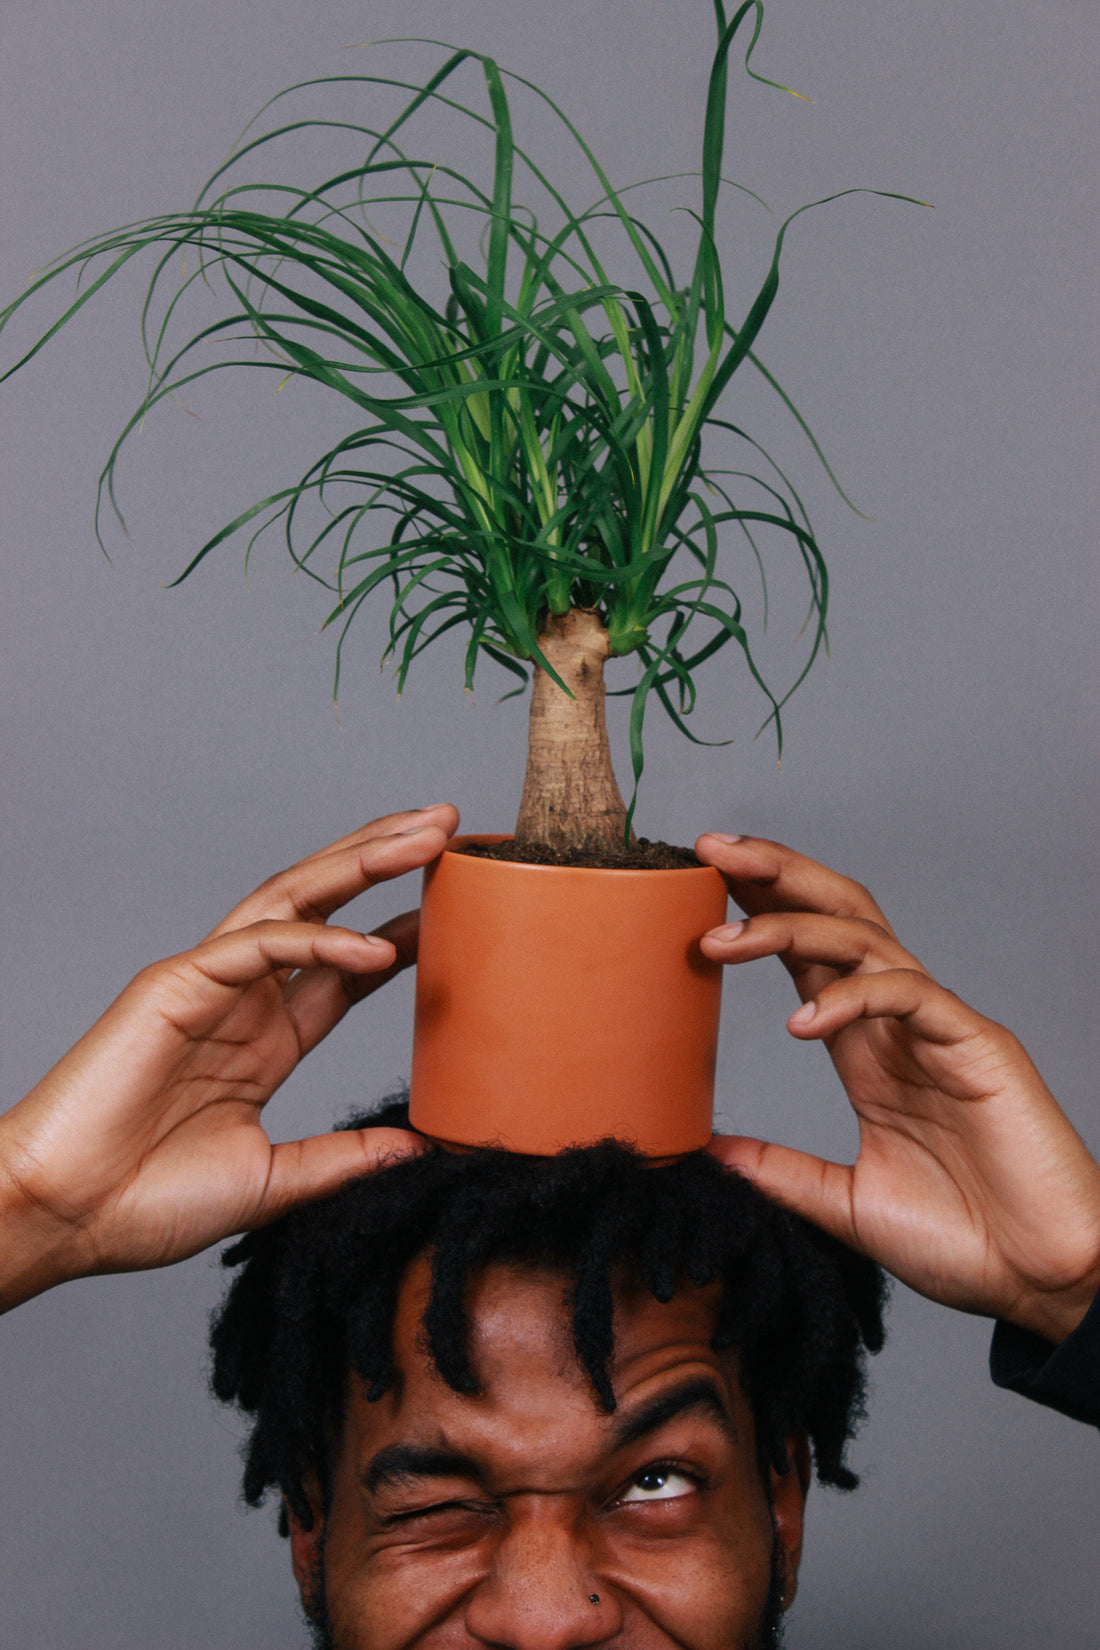 A person playfully sits a Ponytail Palm on top of their head.